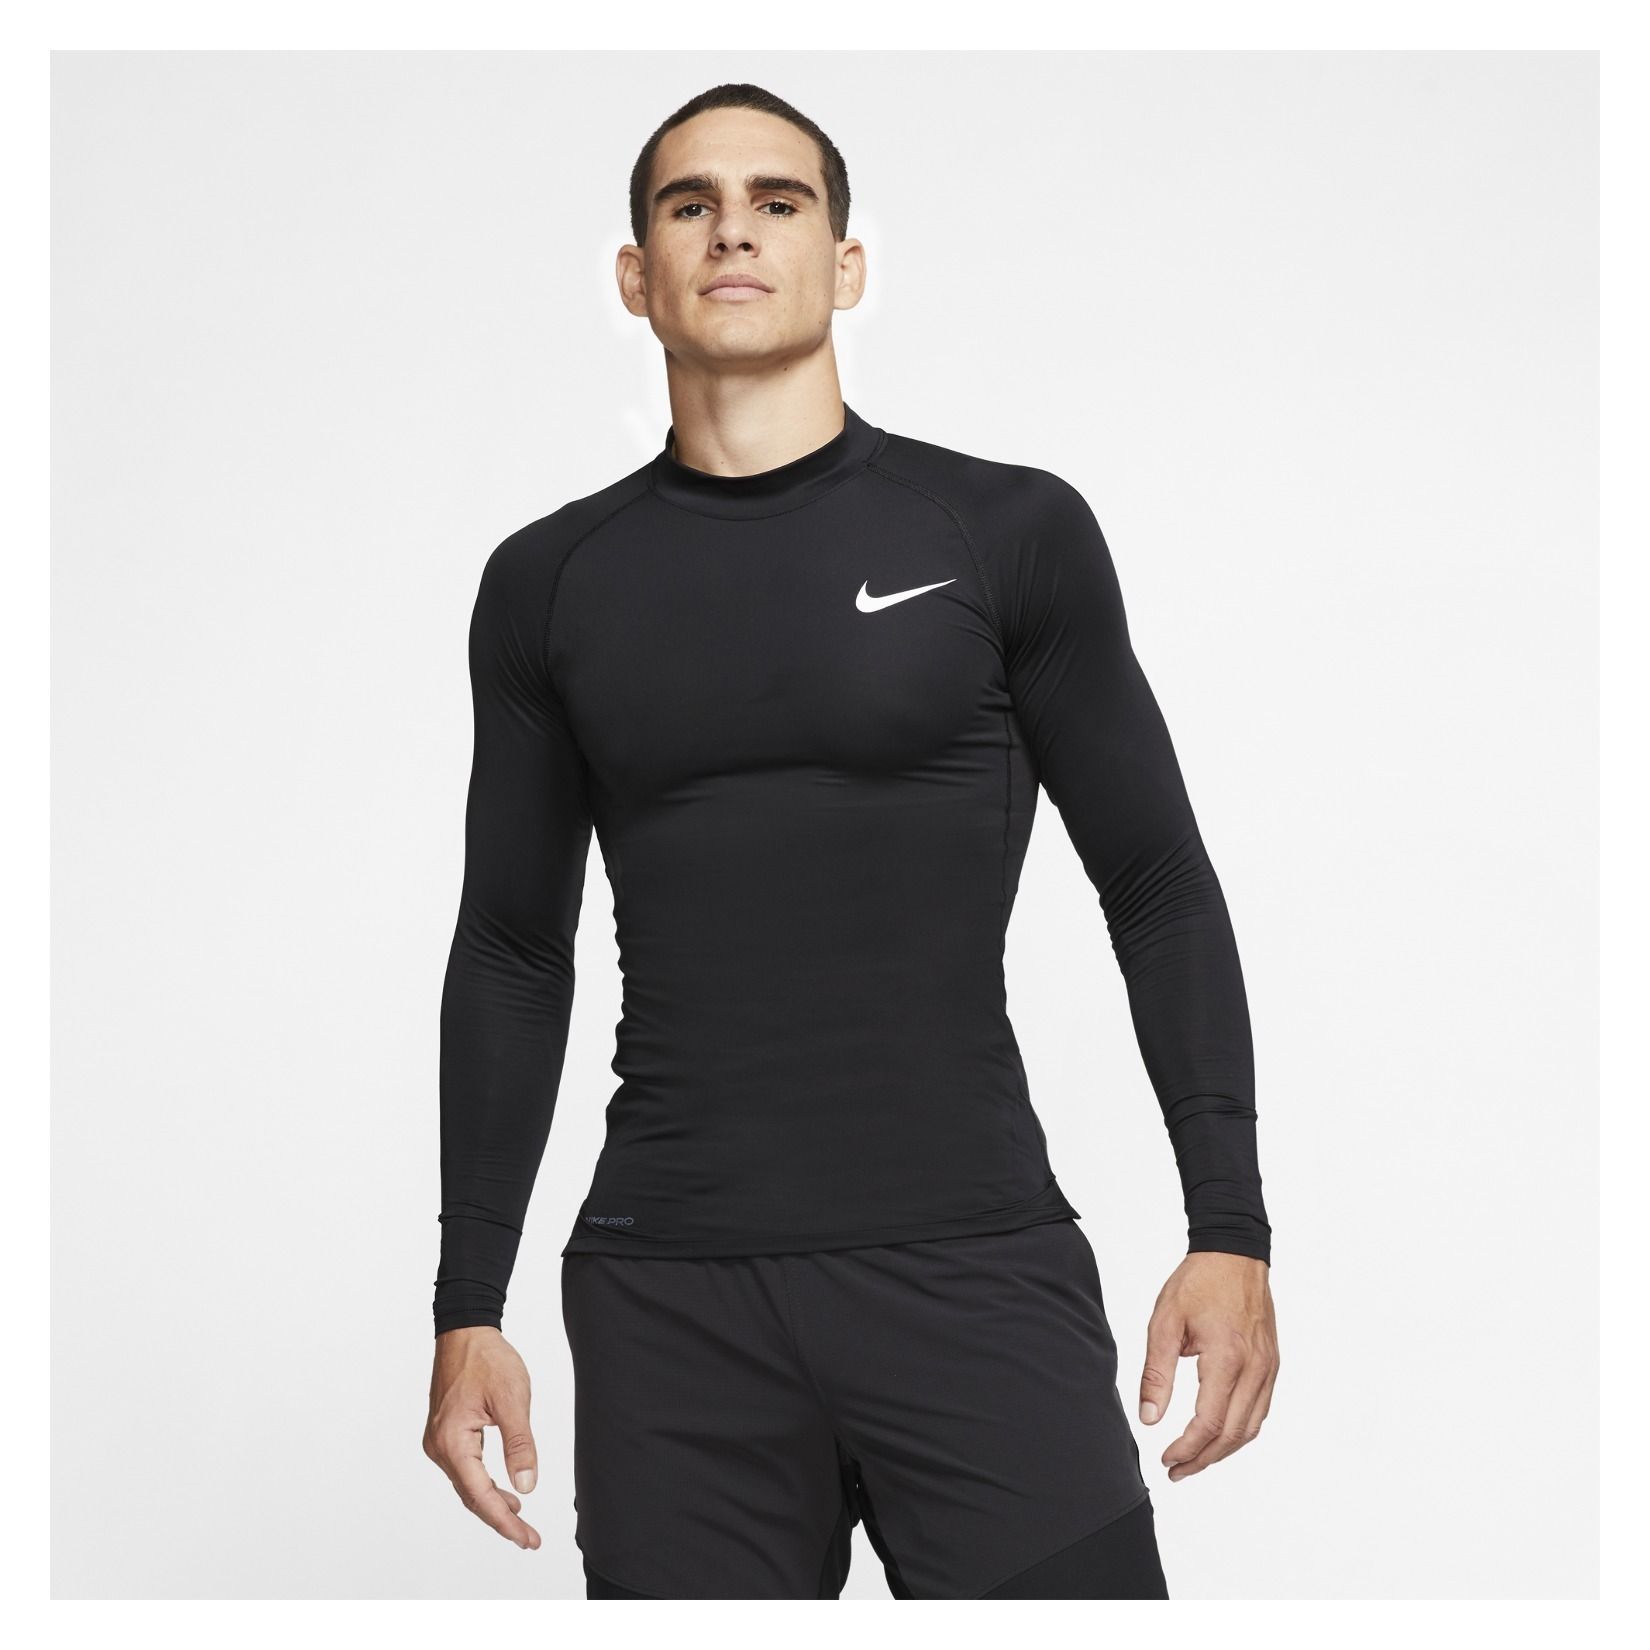 the nike pro tight fit